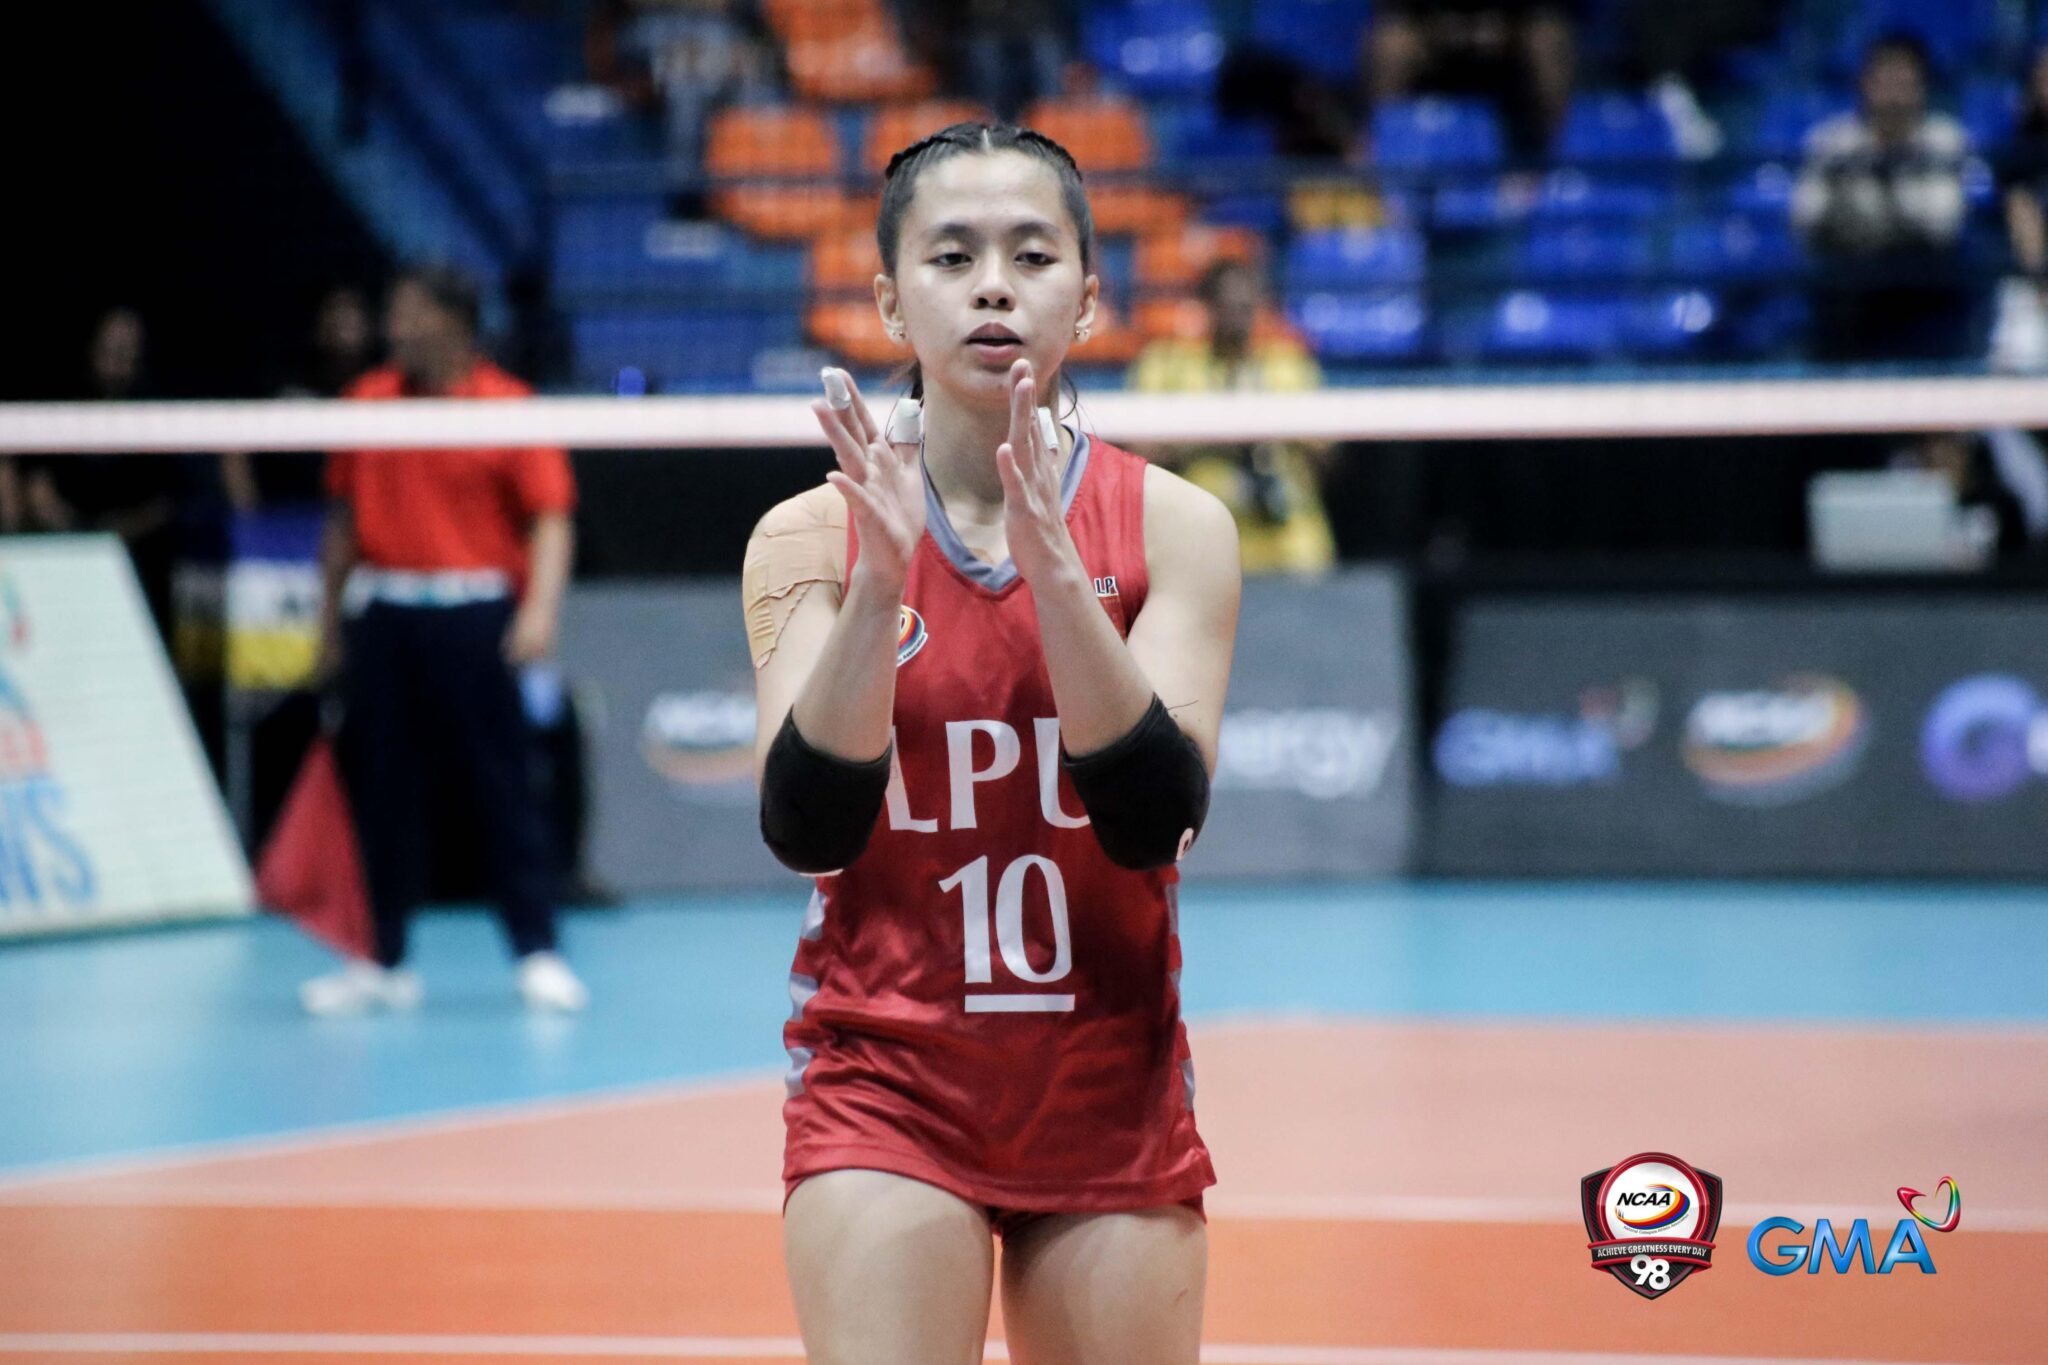 PVL Venice Puzon, NCAA Best Setter, to play for PLDT as guest player